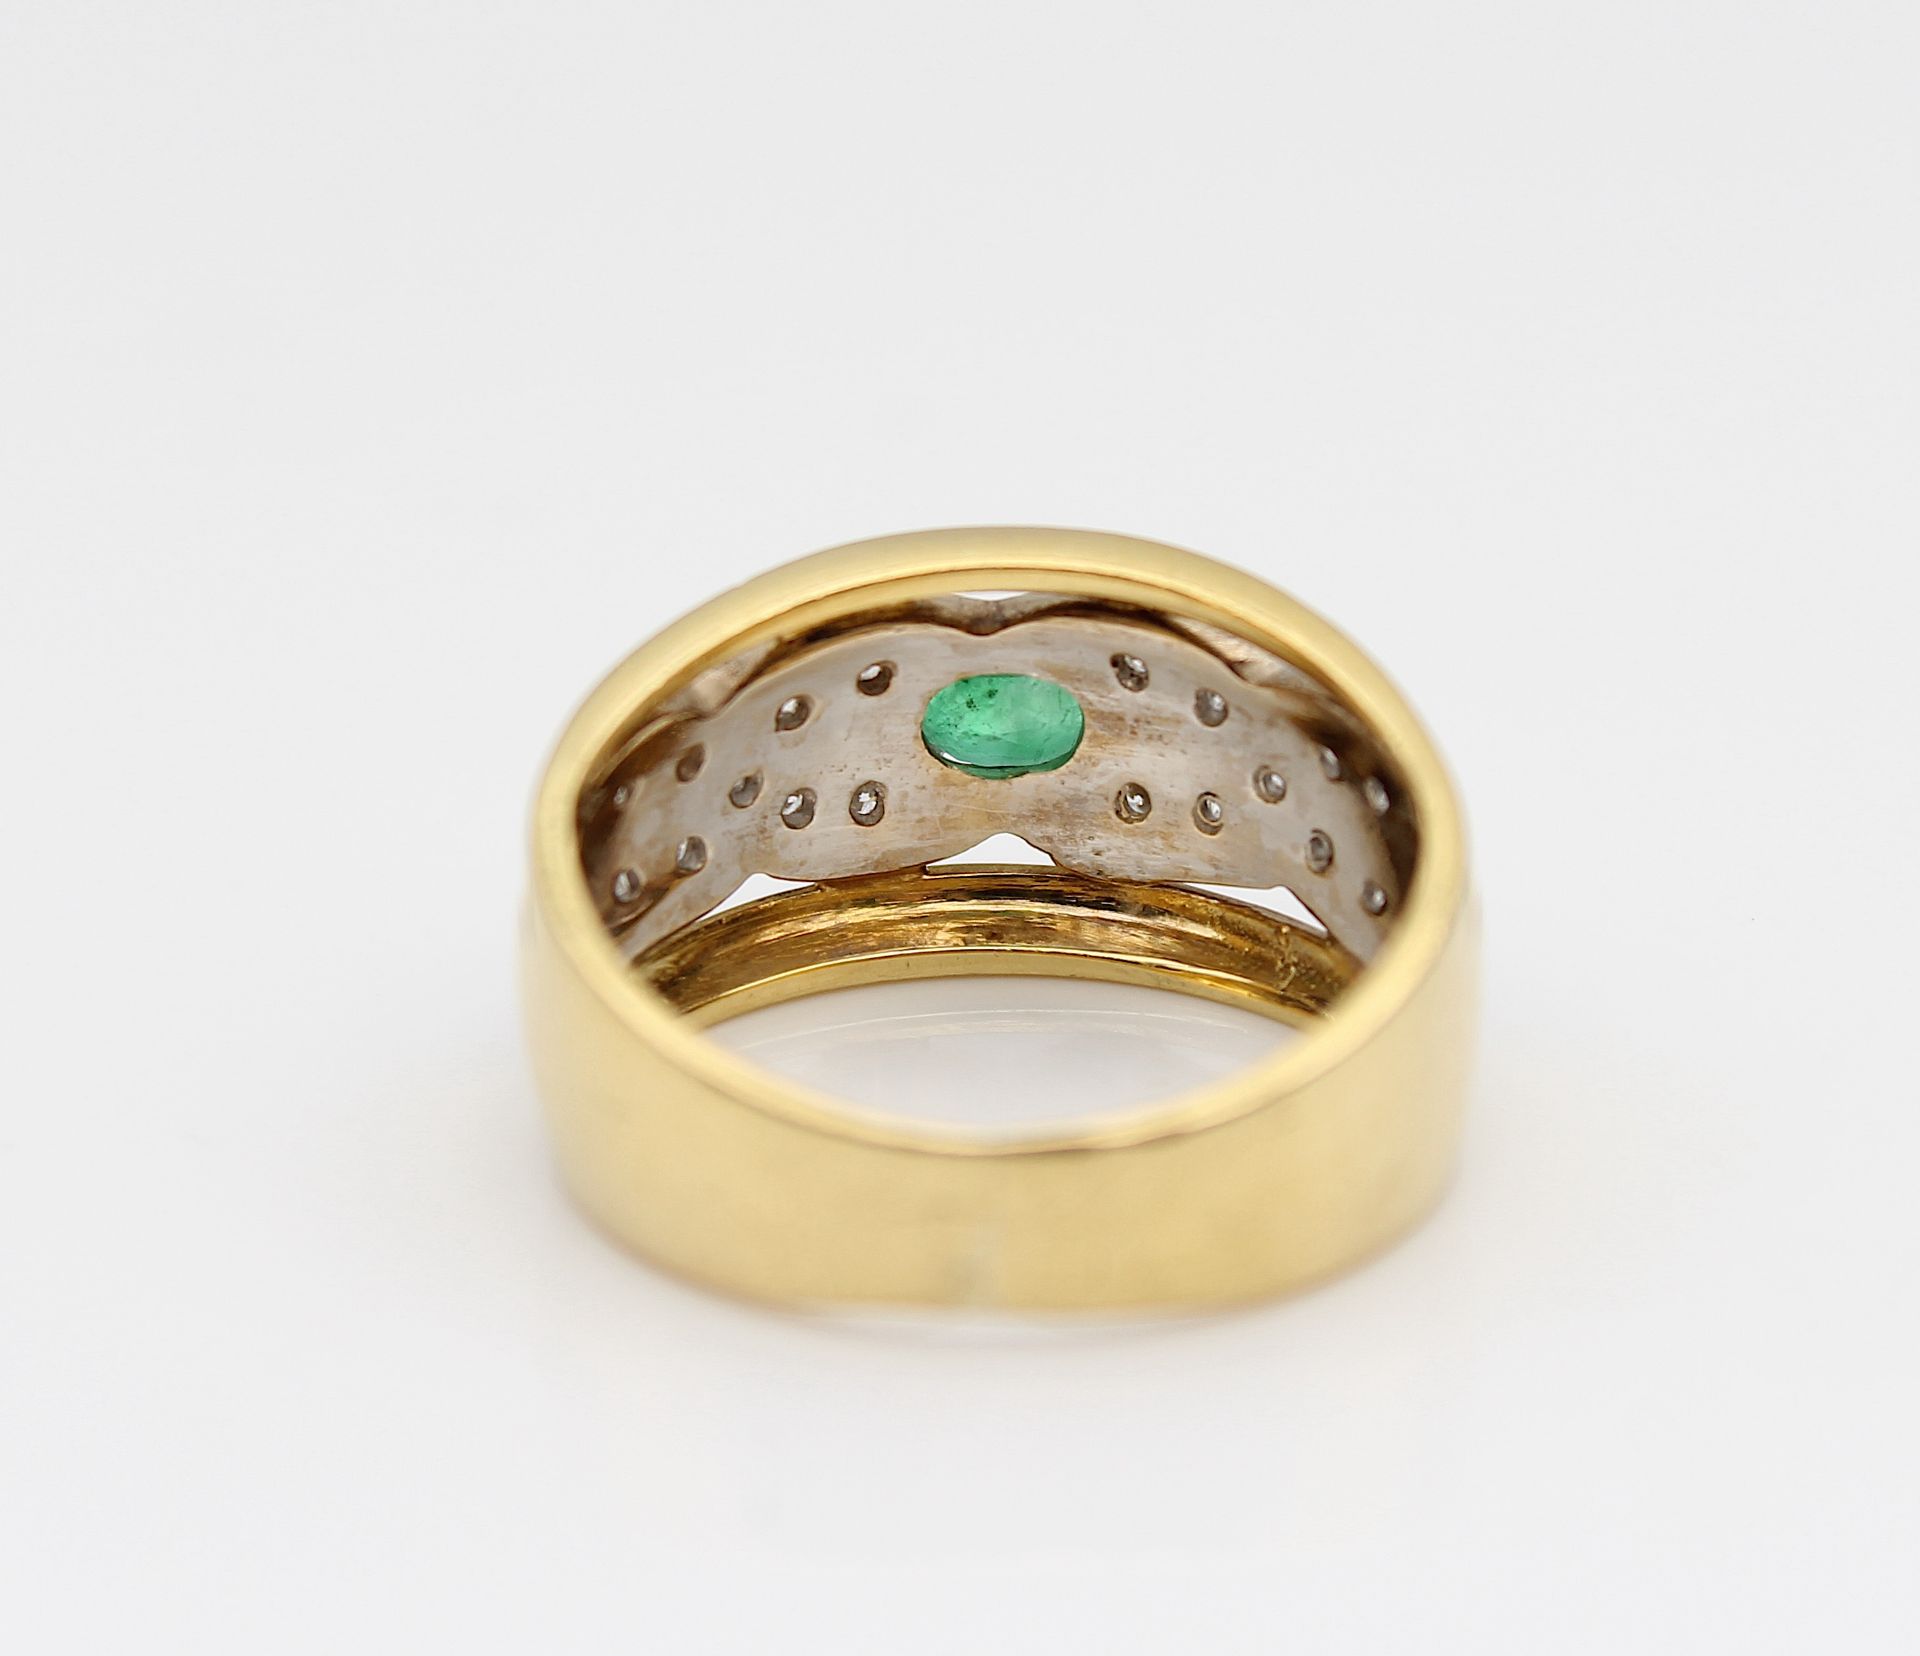 Charming ring with emerald and brilliants - Image 4 of 4